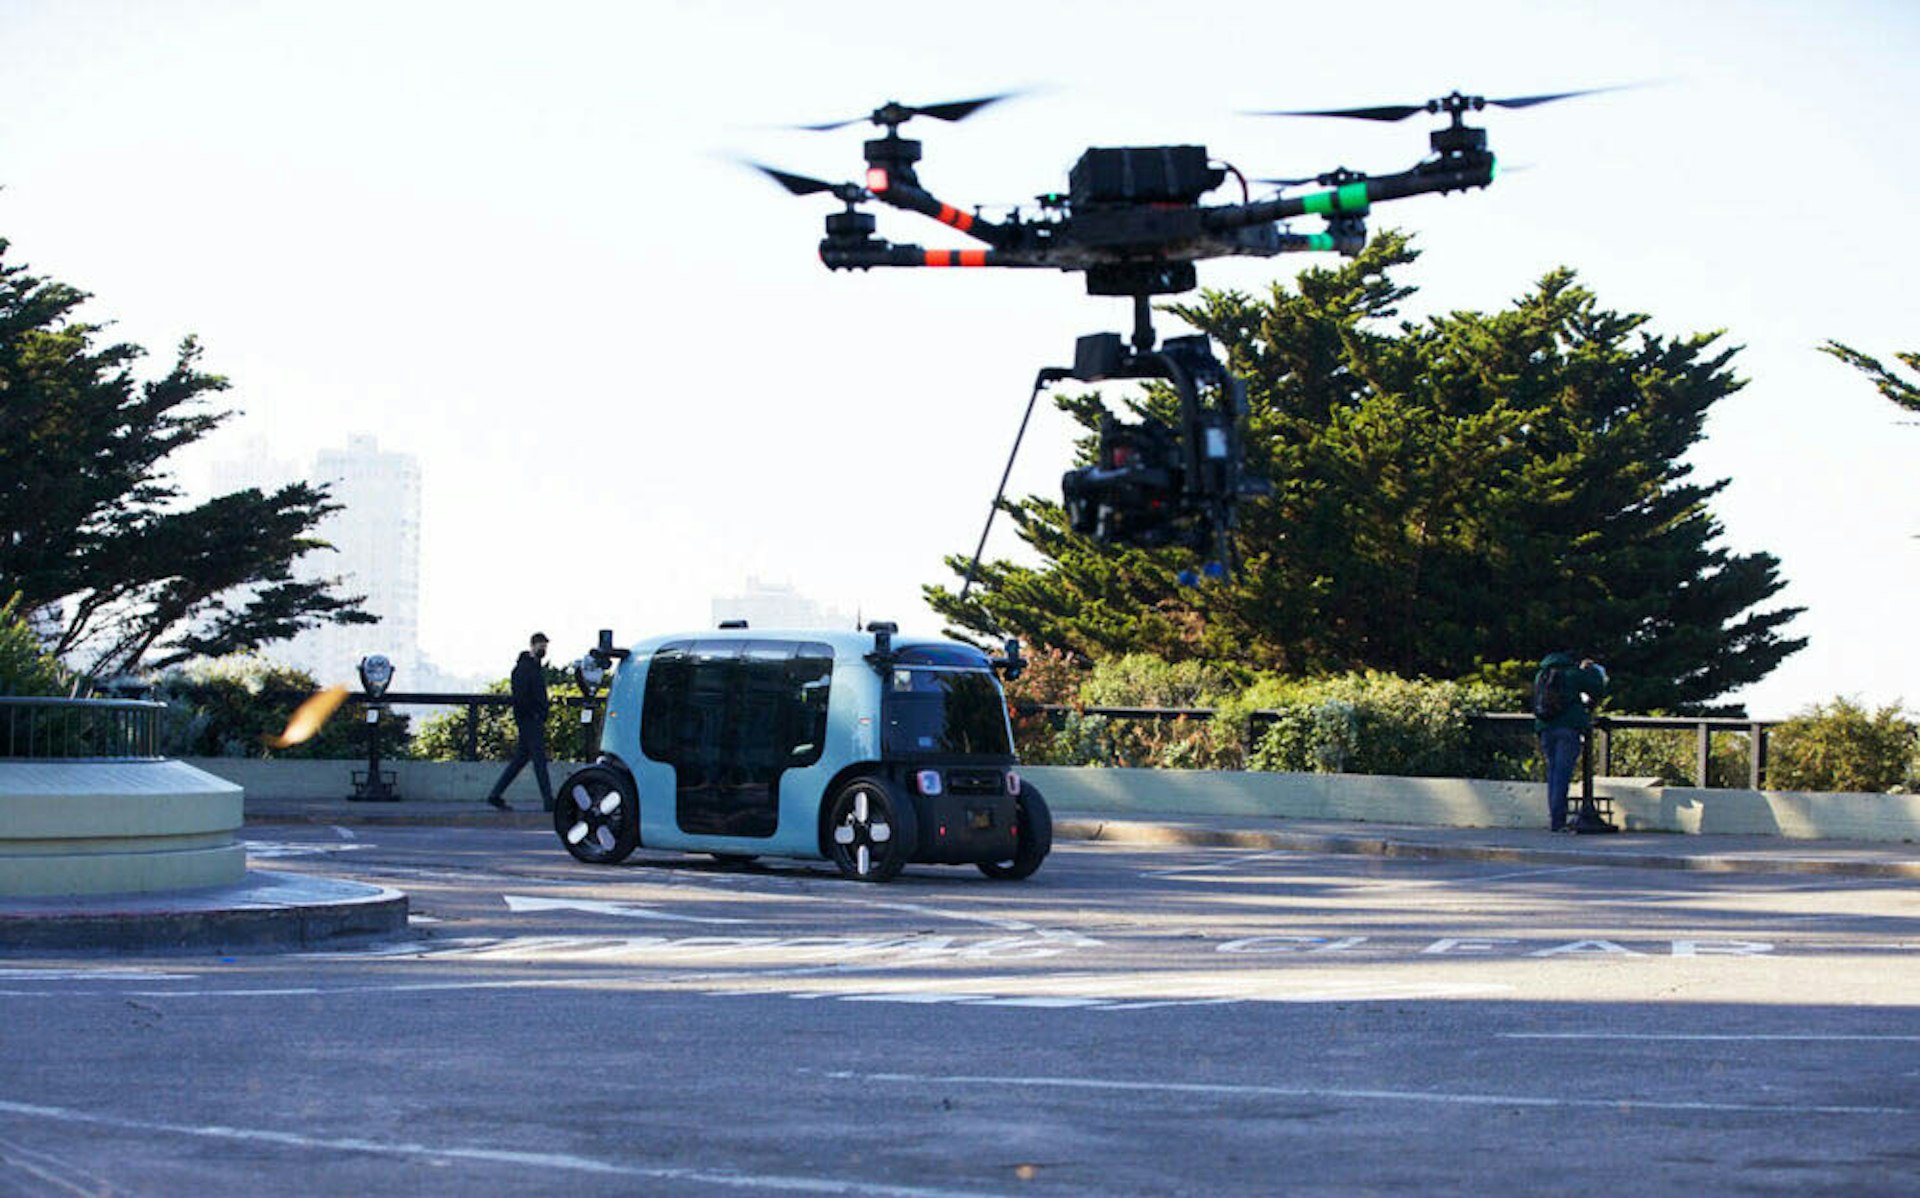 zoox robotaxi in san francisco with a drone